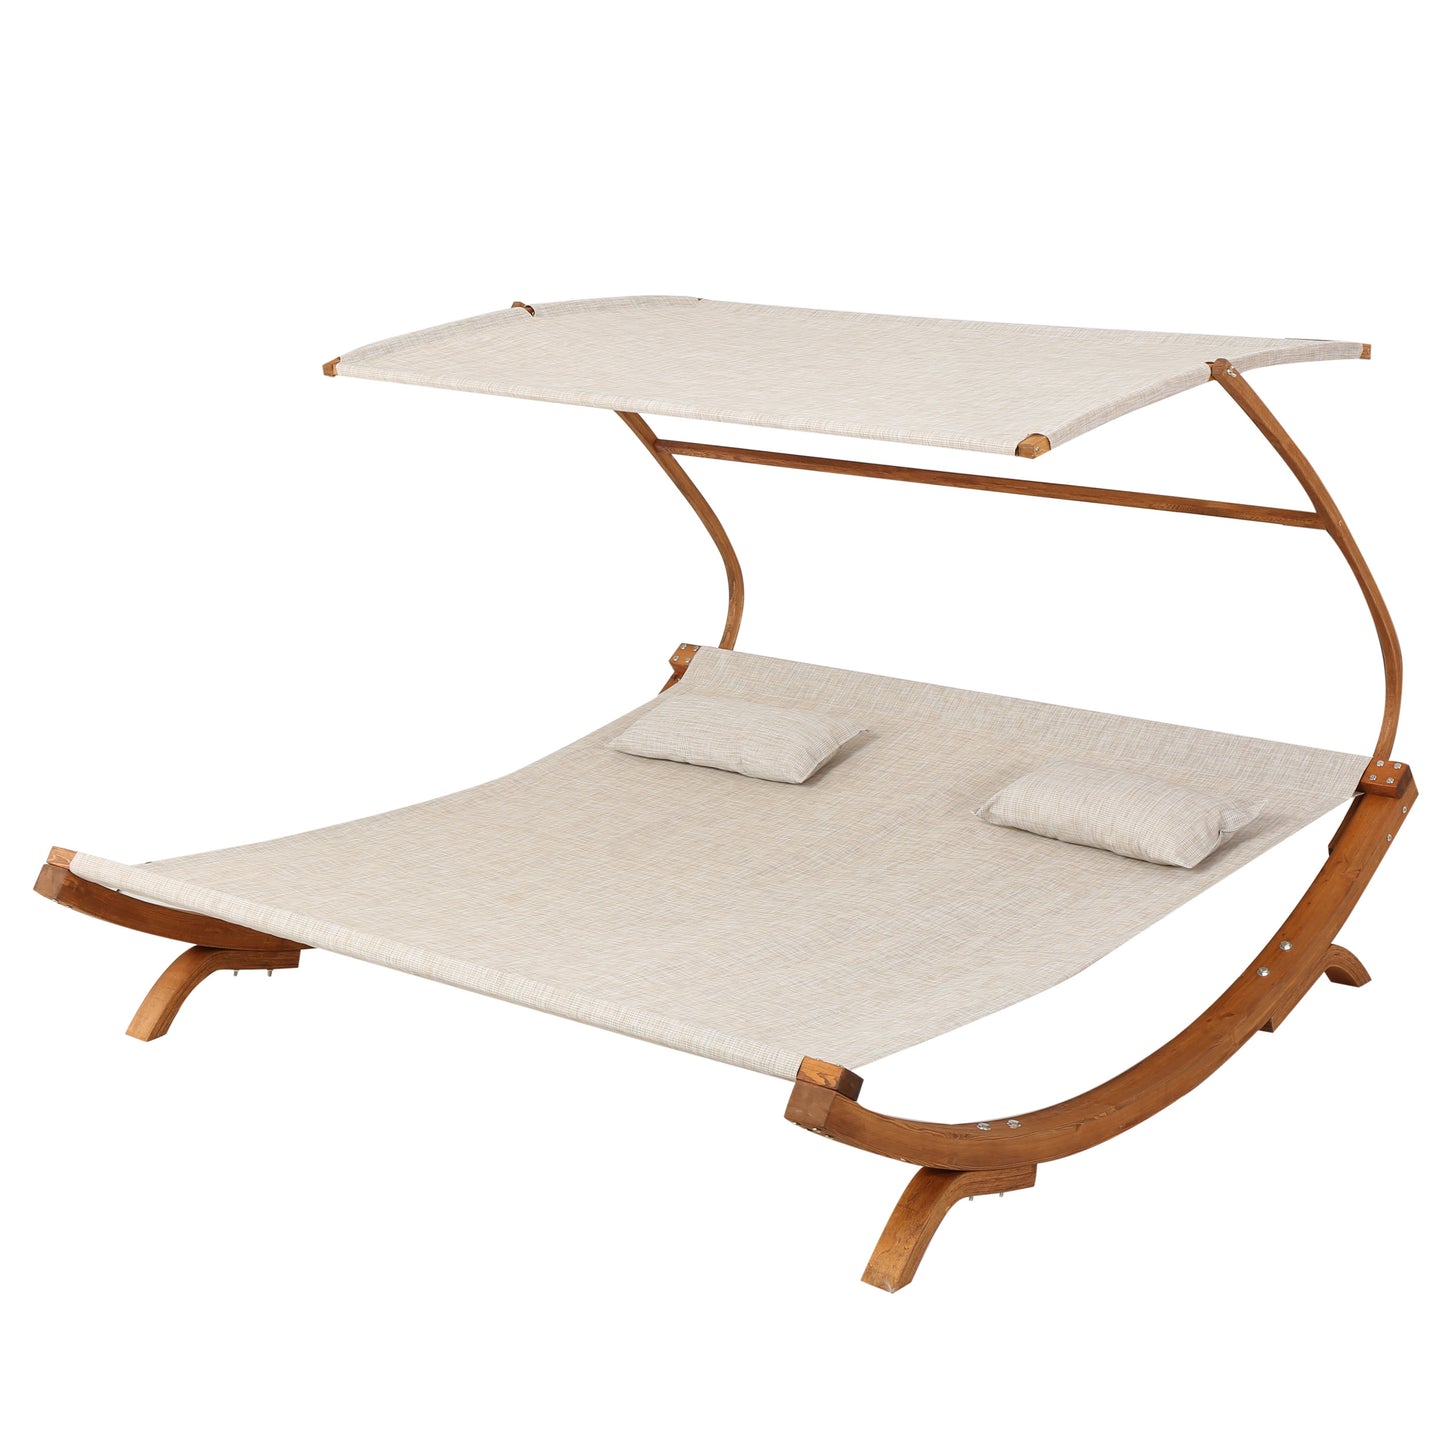 Bayard Outdoor Off-White Sunbed with Adjustable Canopy